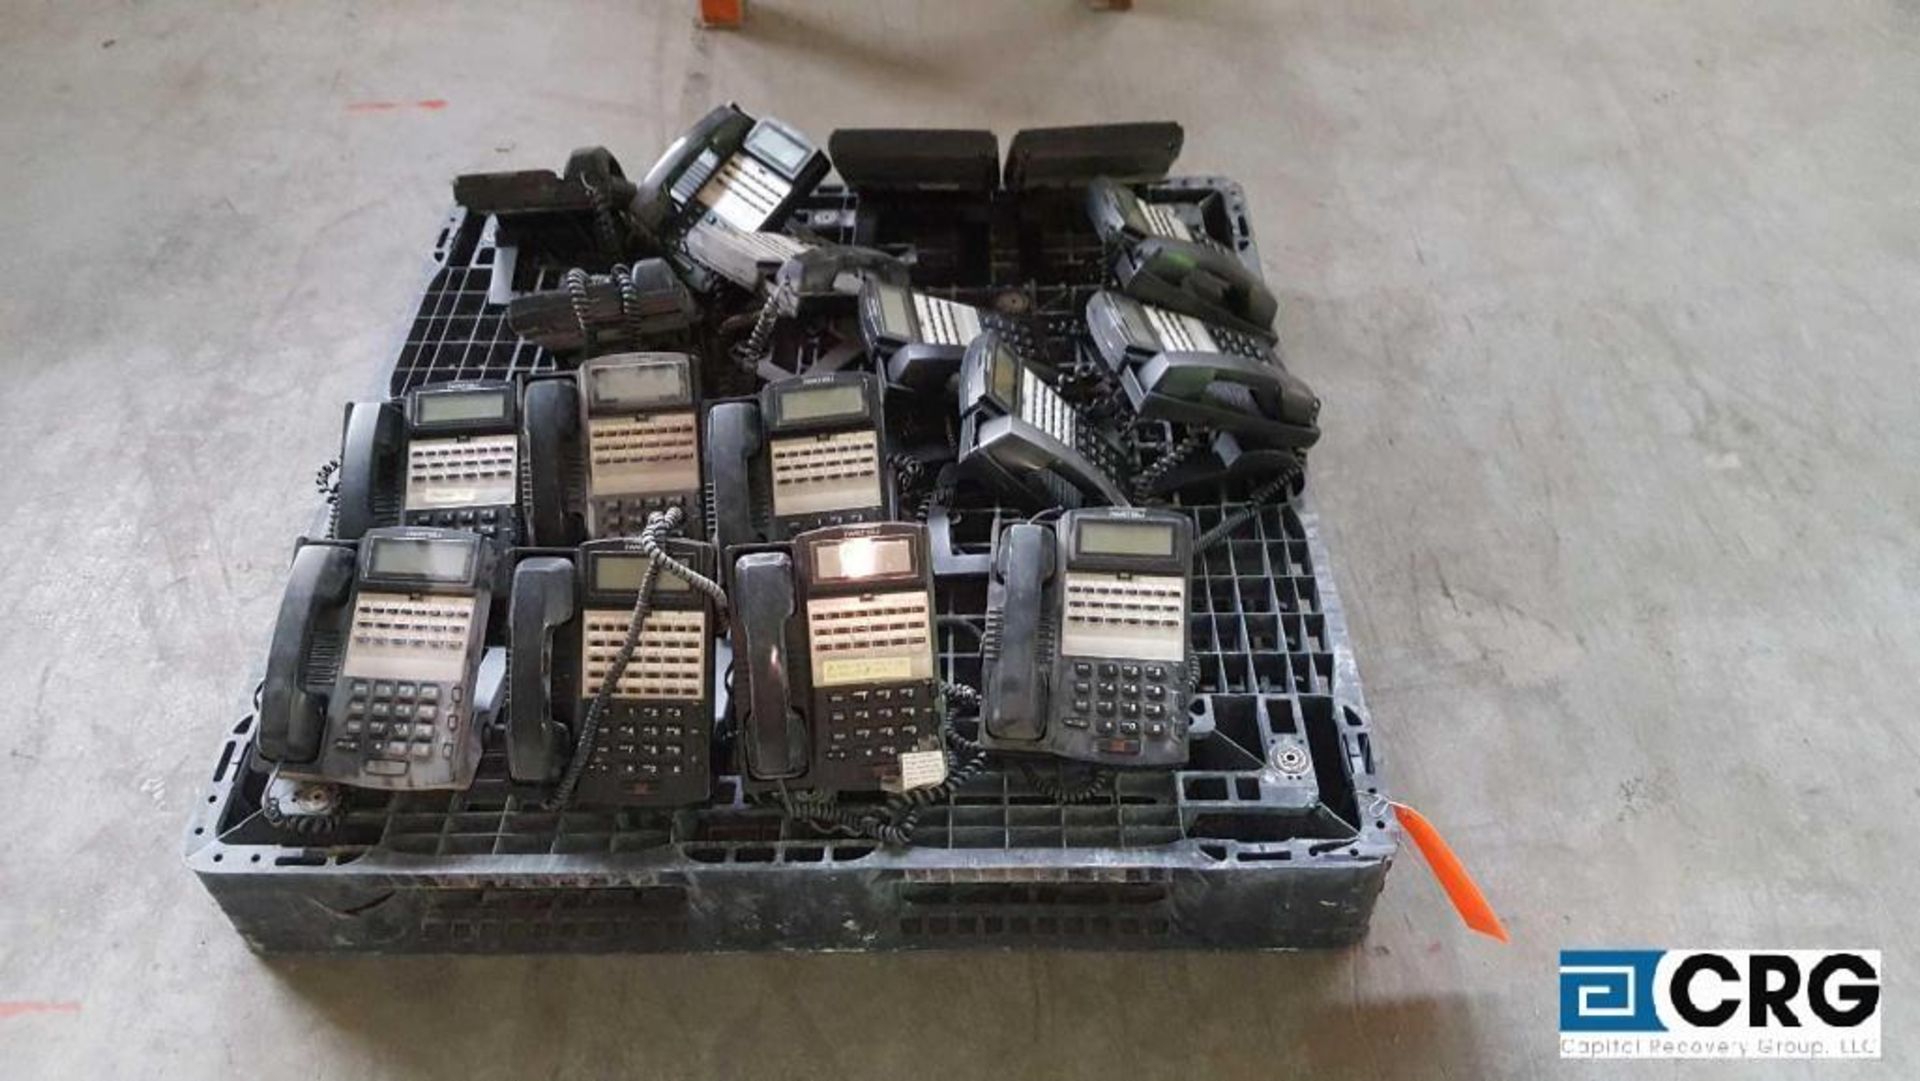 Lot of assorted telephone hand sets, printer, assorted electronics s, auto lights, etc.